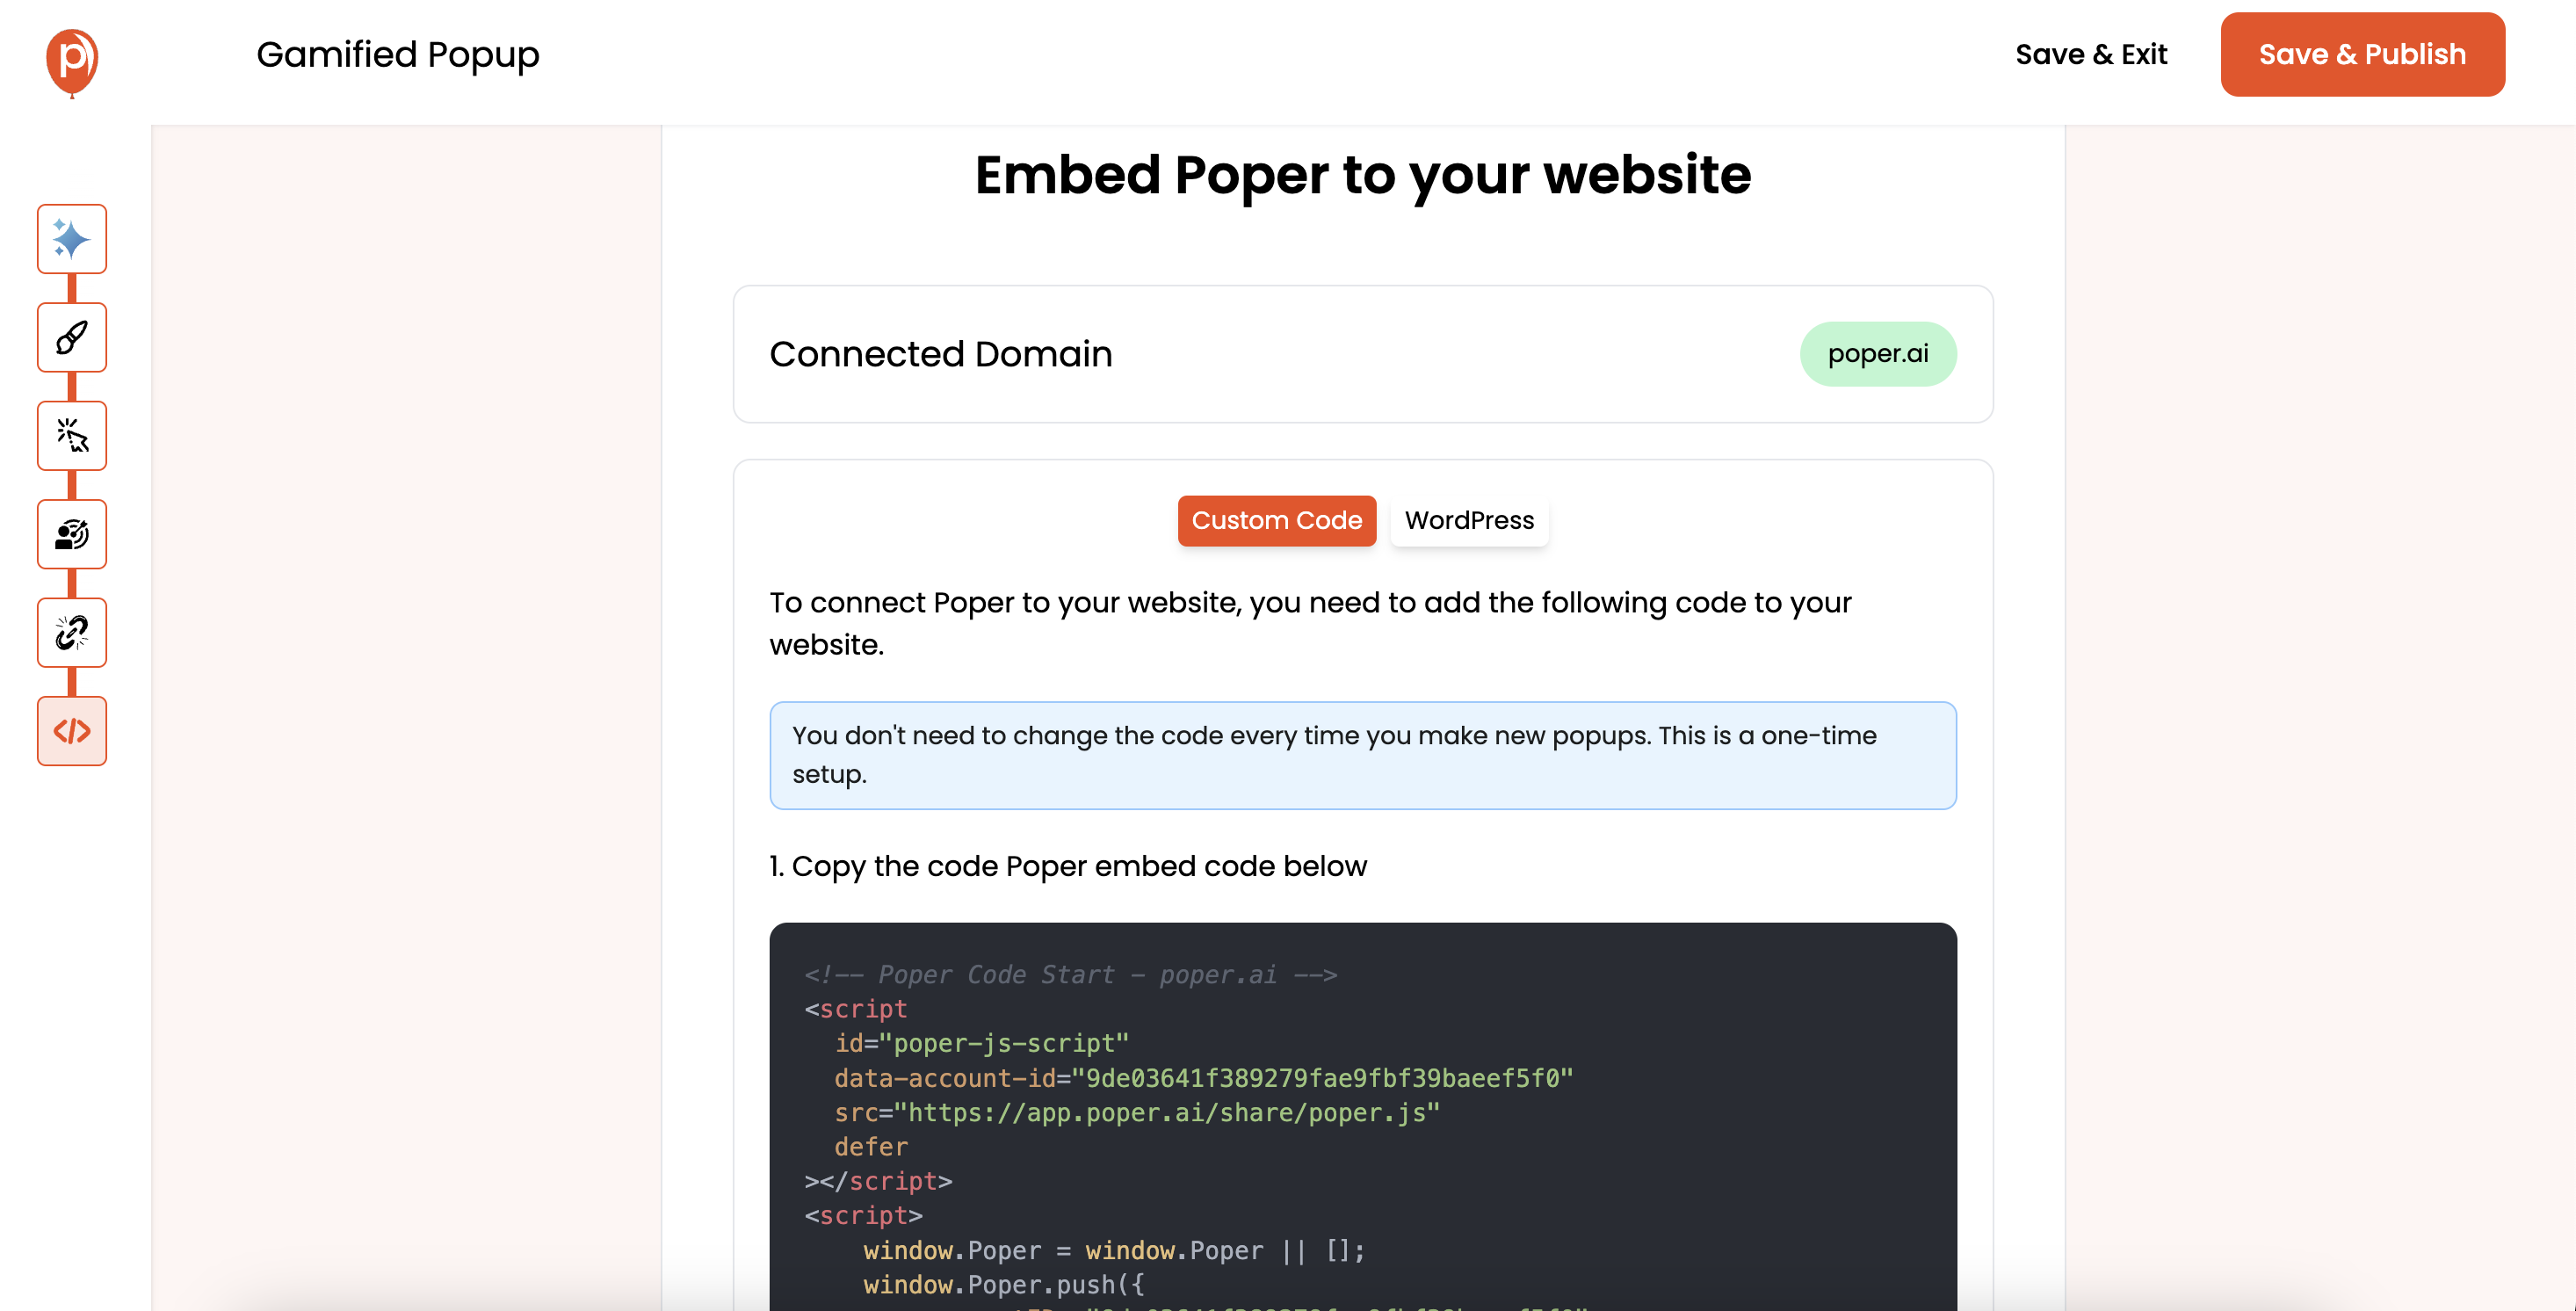 Embed Poper to Your Website